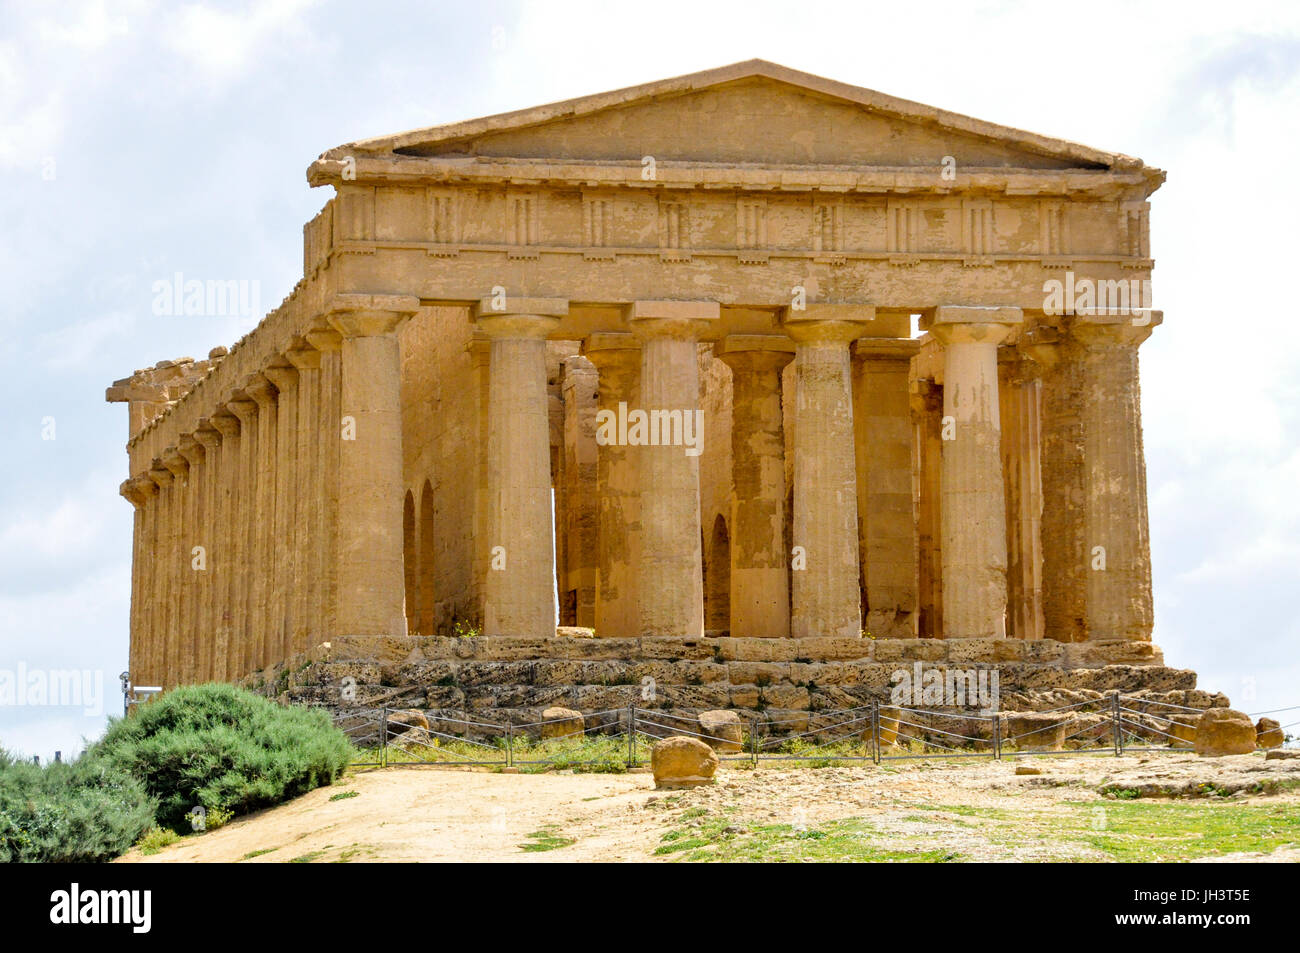 Temple of Concordia, Vally of the Temples, Agrigento, Sicily, Italy. Stock Photo